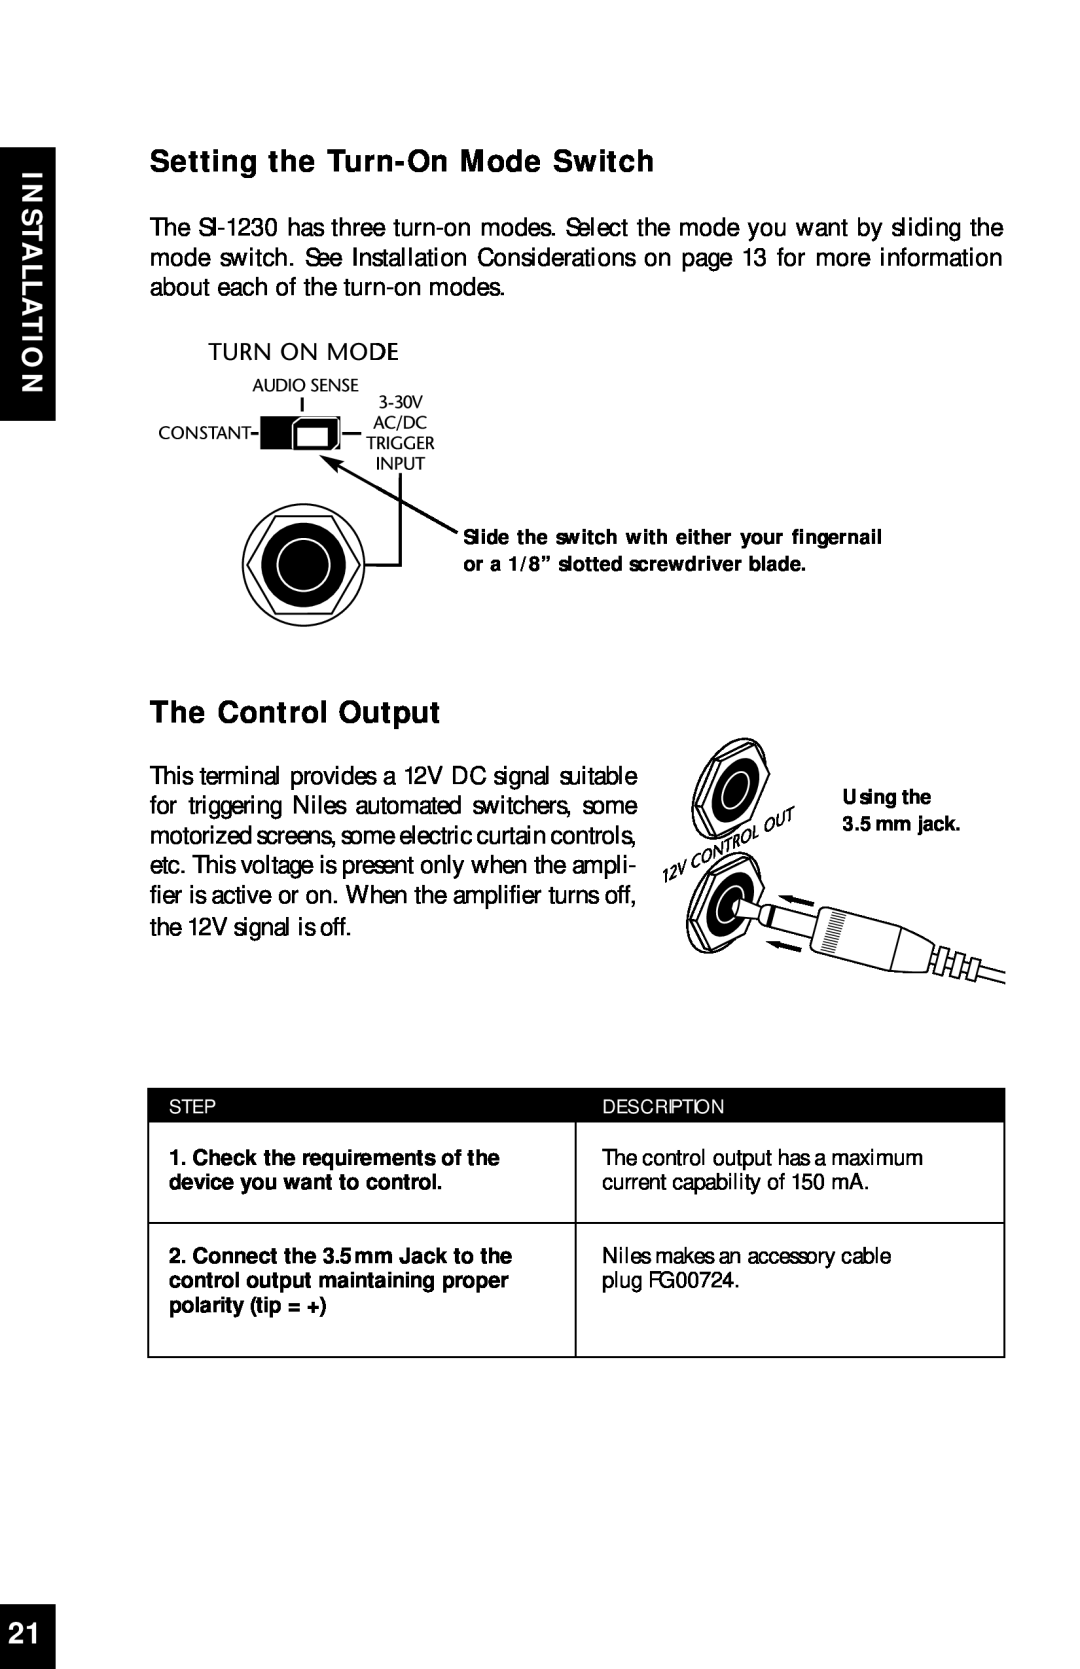 Niles Audio SI-1230 manual Setting the Turn-OnMode Switch, The Control Output, Installation, Step, Description 